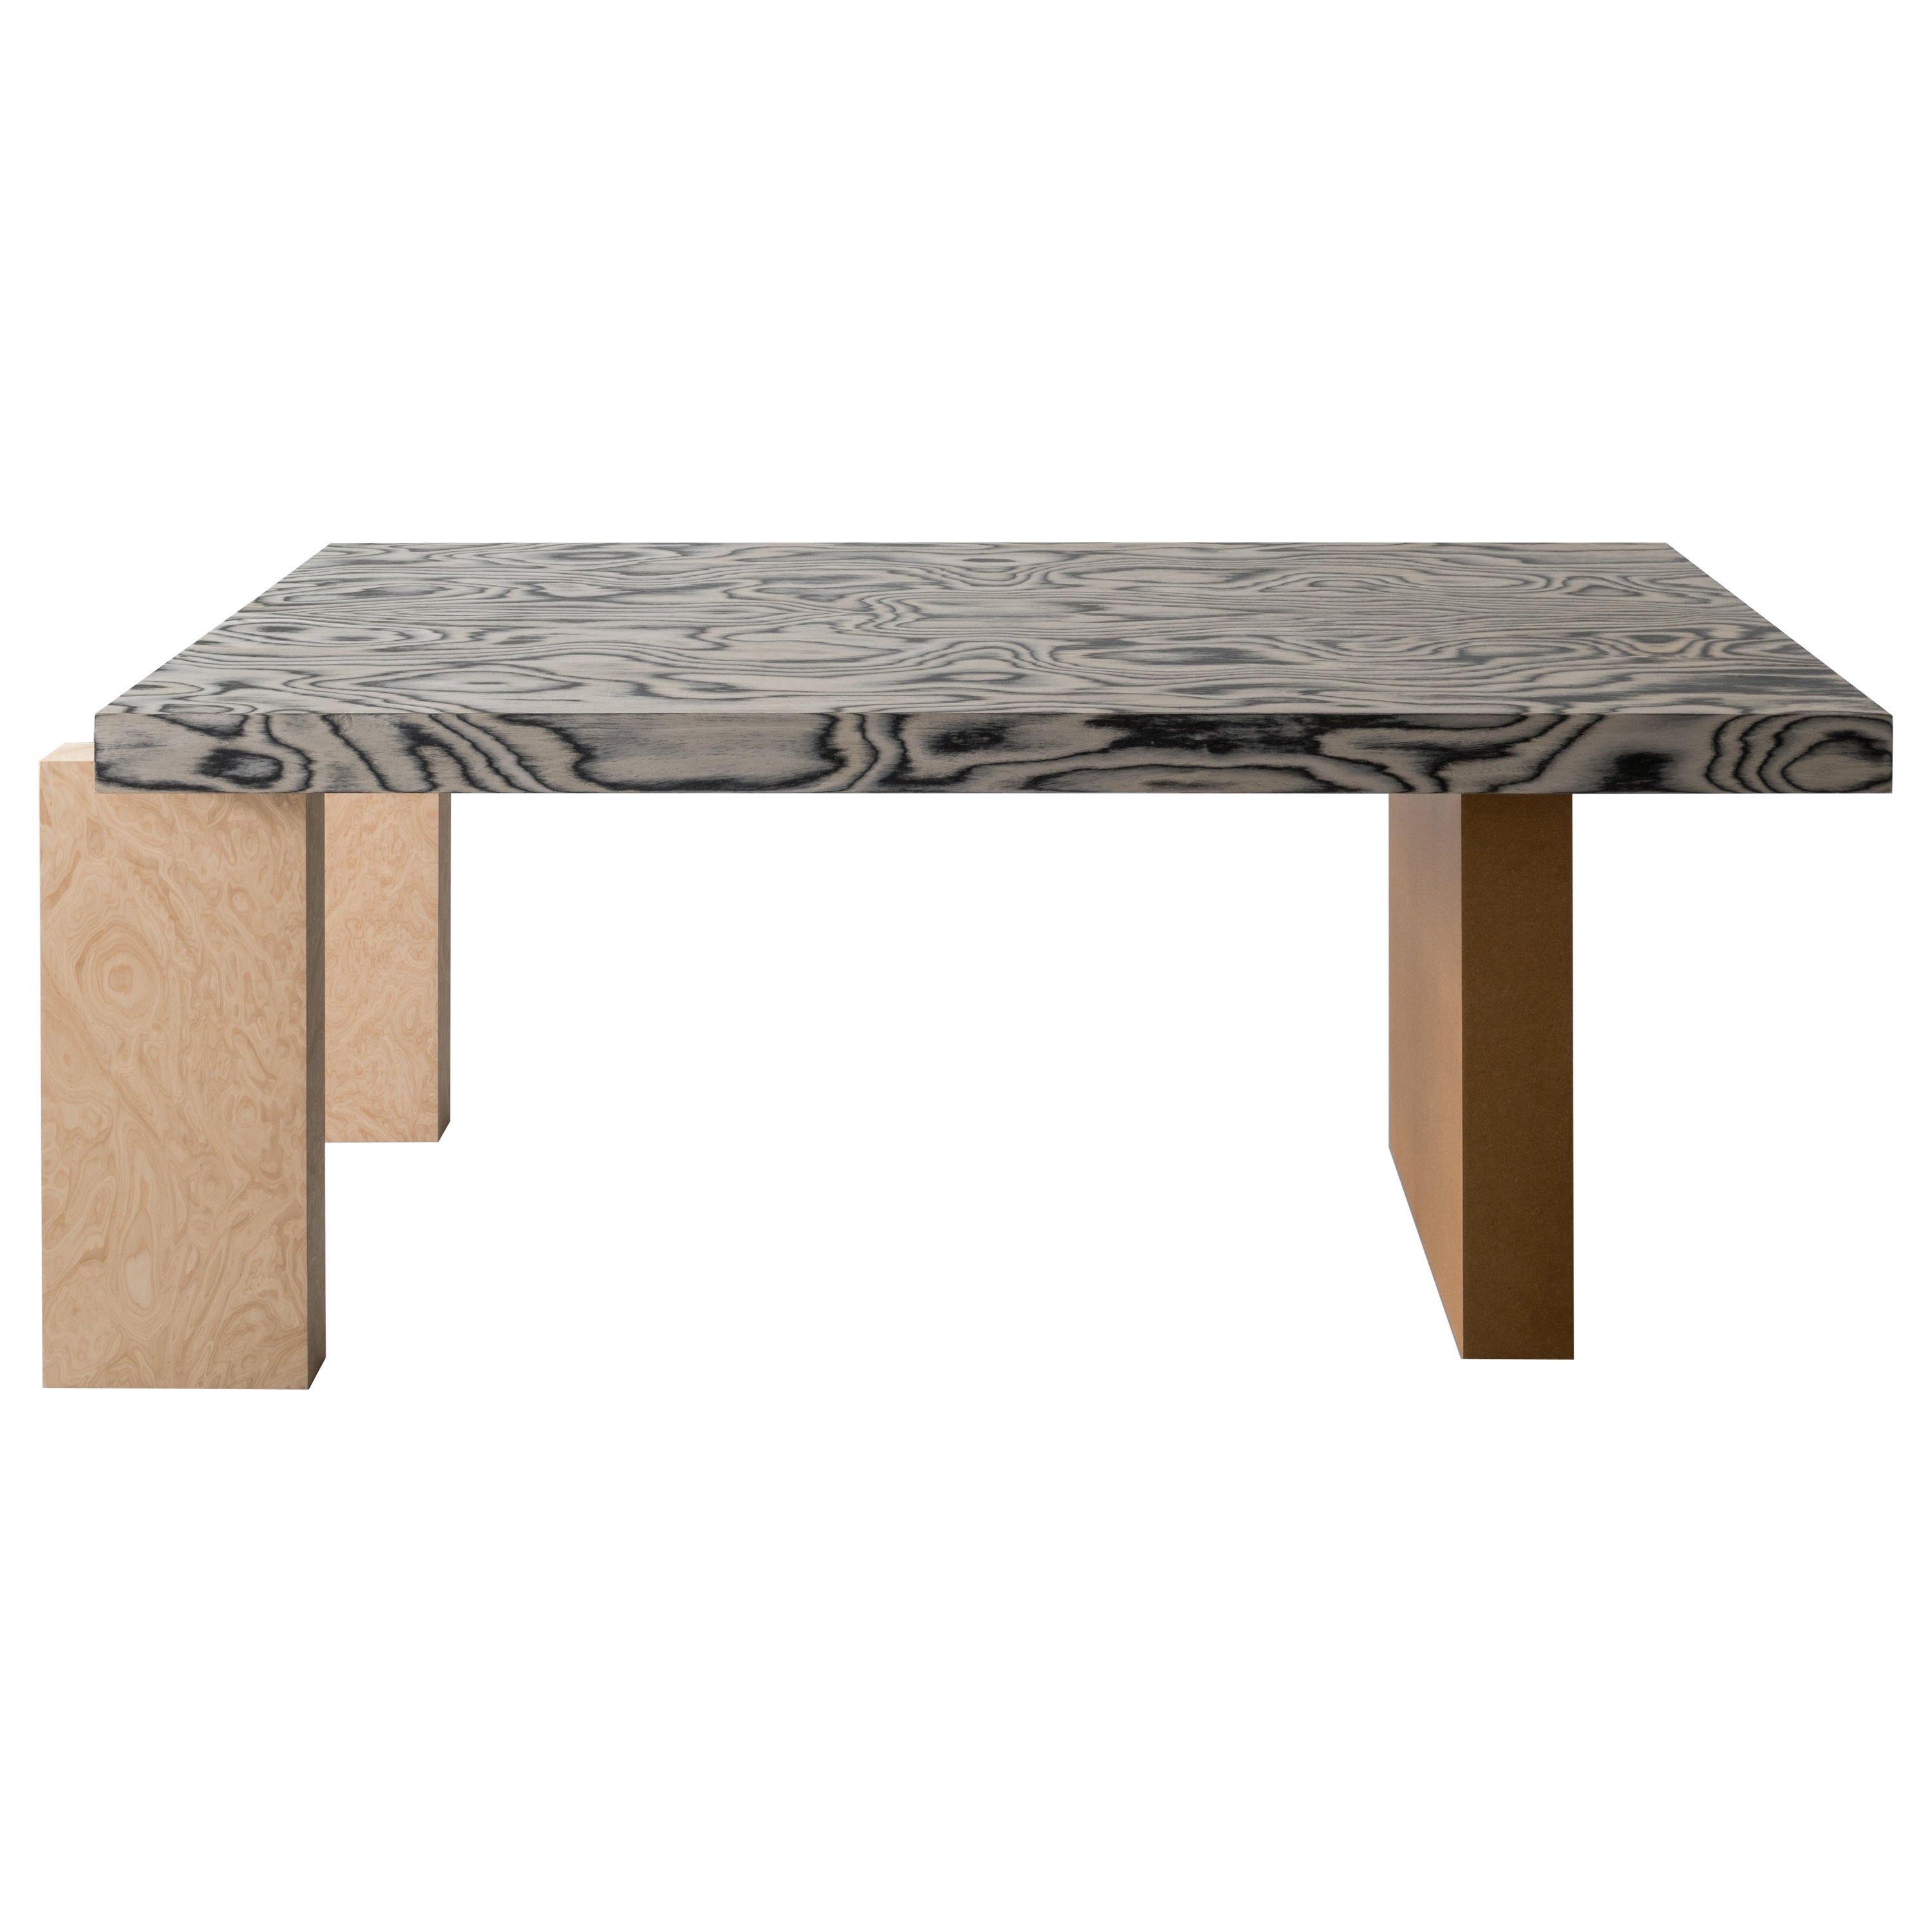 Contemporary Wood Veneered Dining Table with ALPI Sottsass Veneered Table Top For Sale